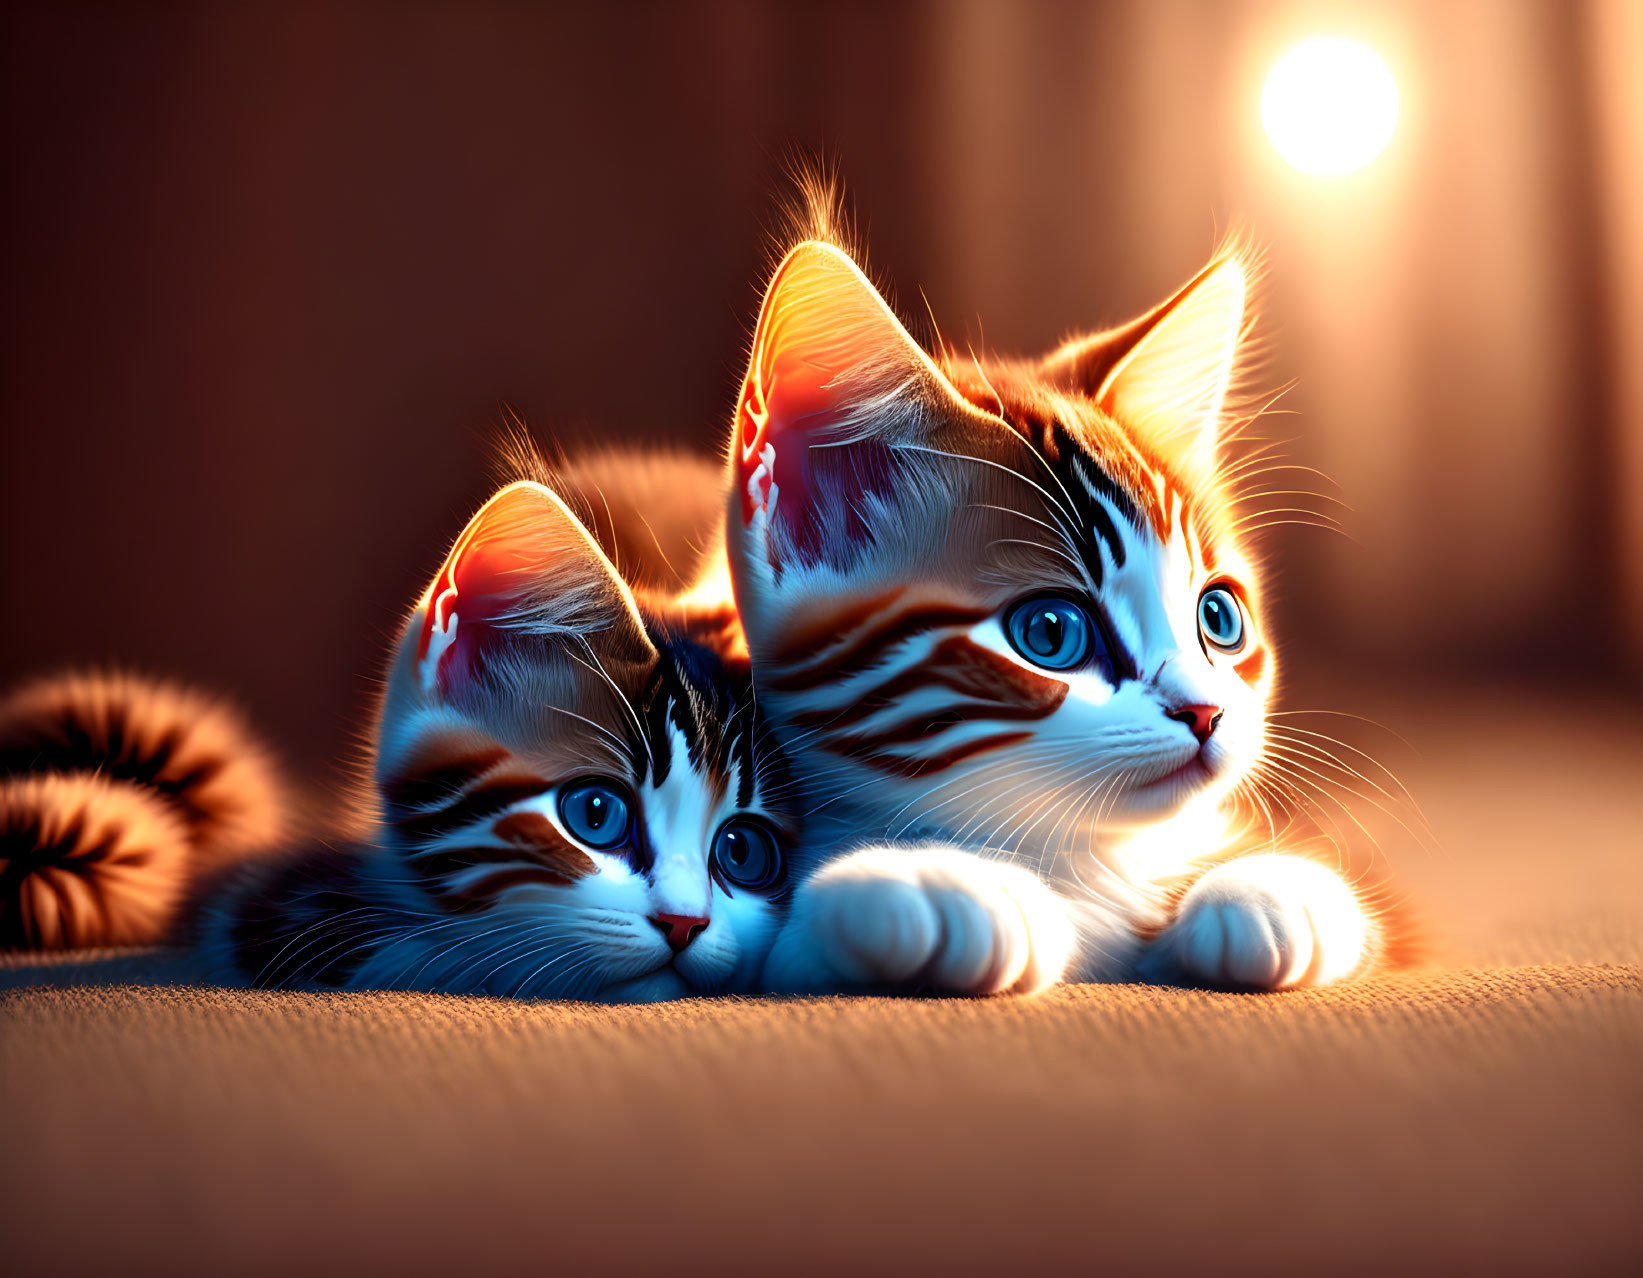 Adorable kittens with striking markings cuddle in warm light